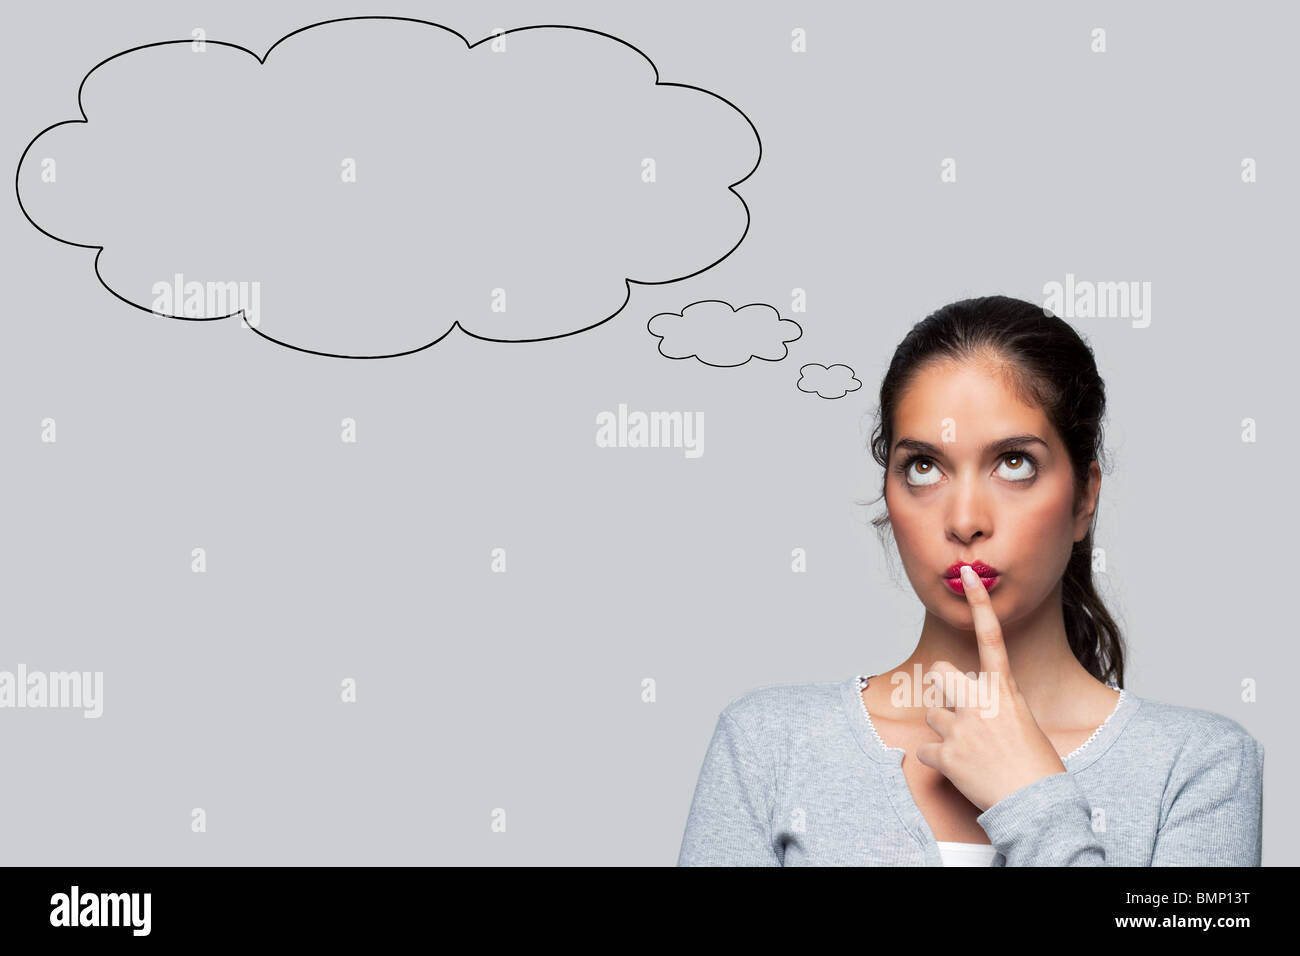 Woman with big brown eyes looking upwards thinking with blank thought bubbles above her head, isolated on white background. Stock Photo